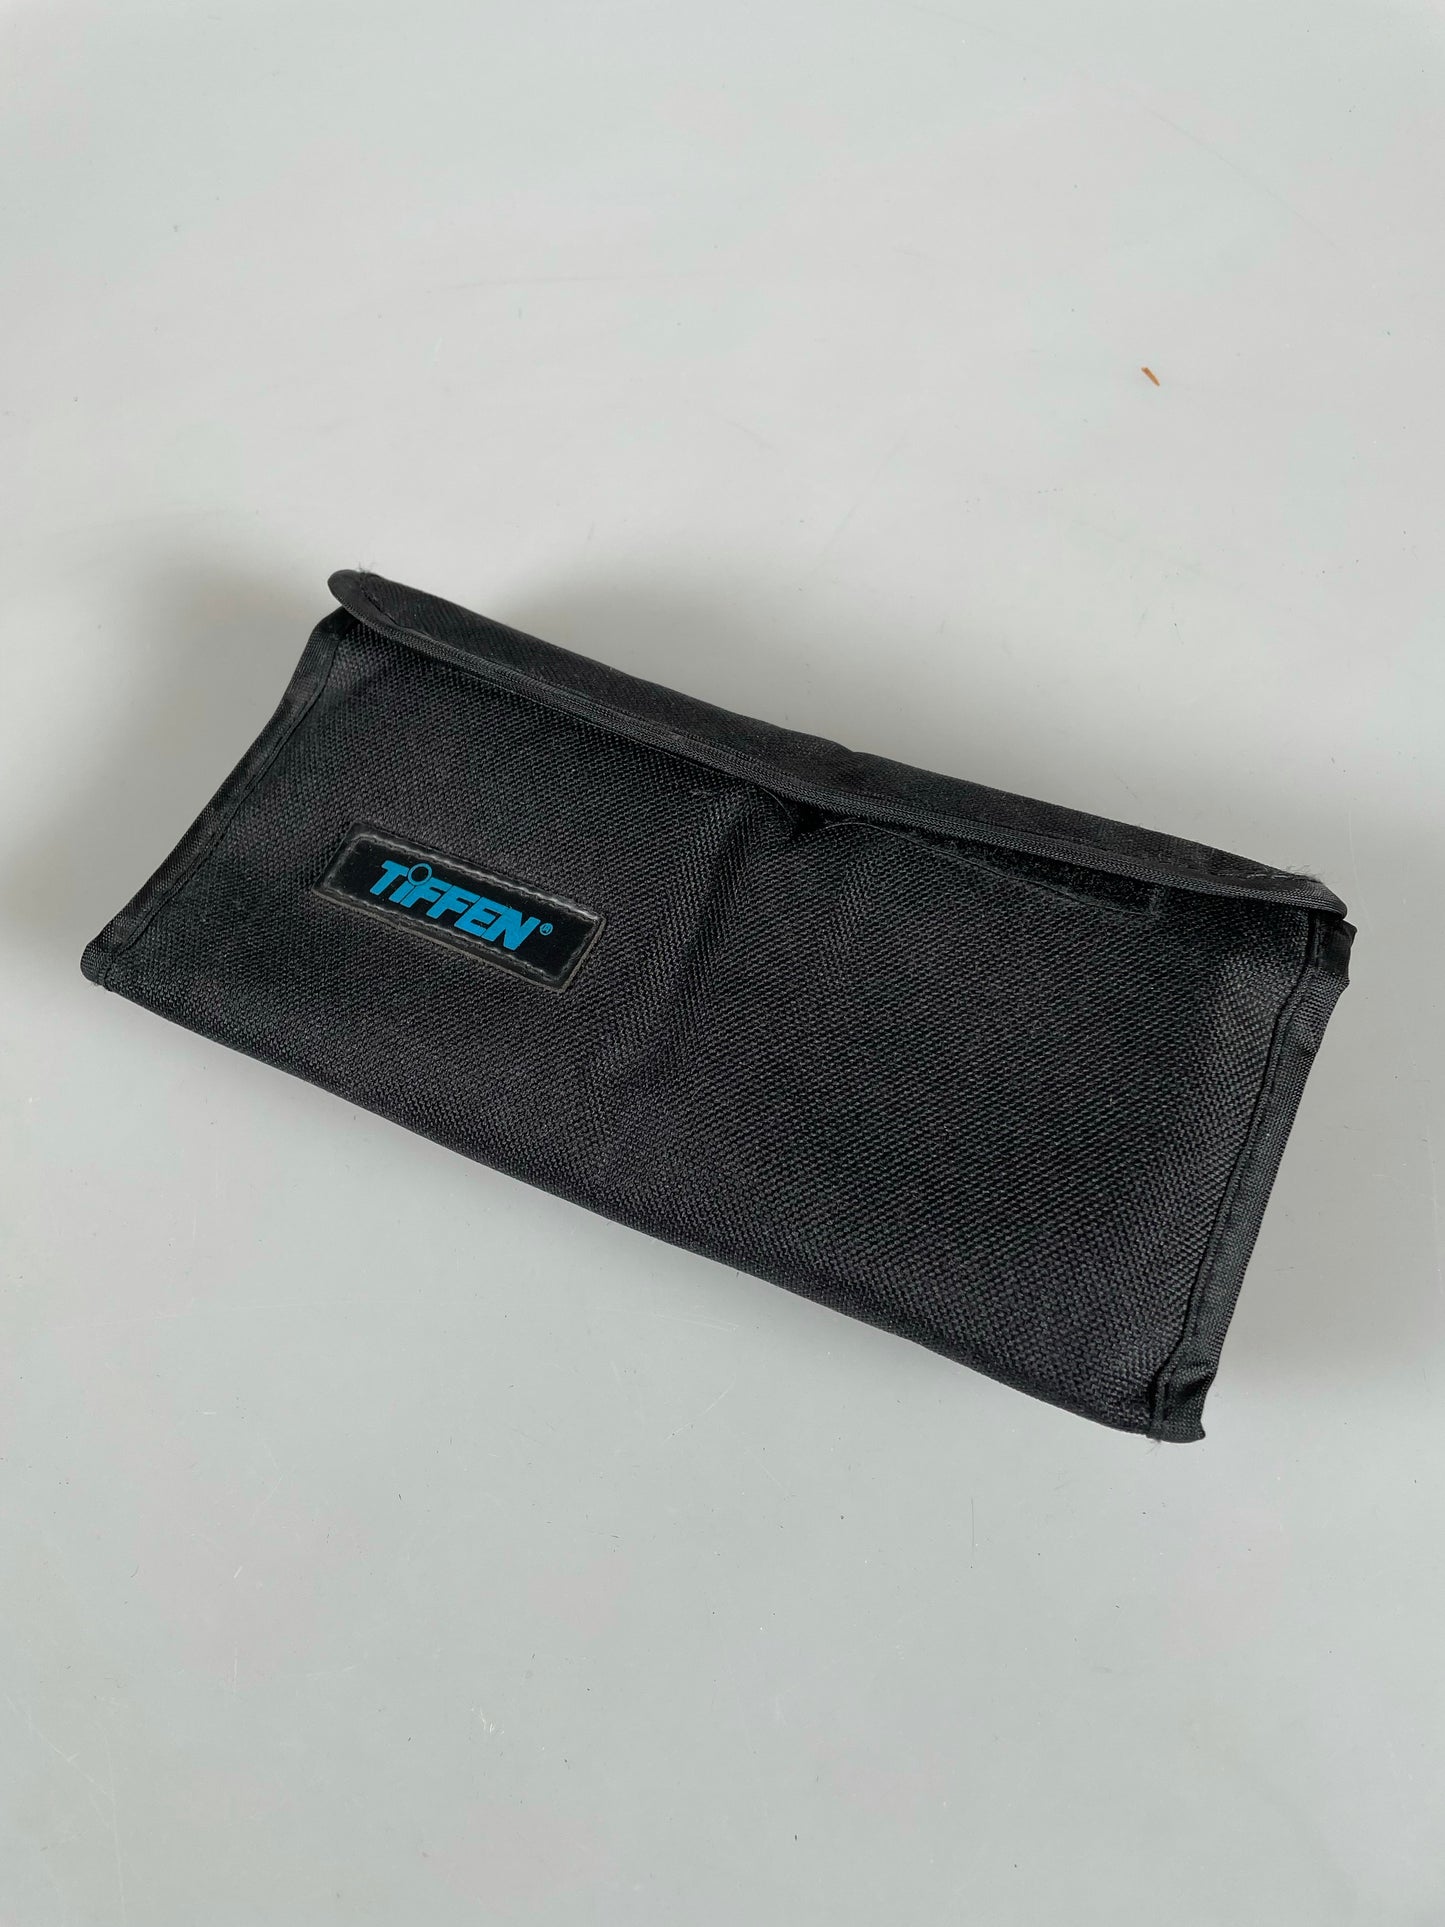 Tiffen Filter Pouch Canvas case for 6 filters